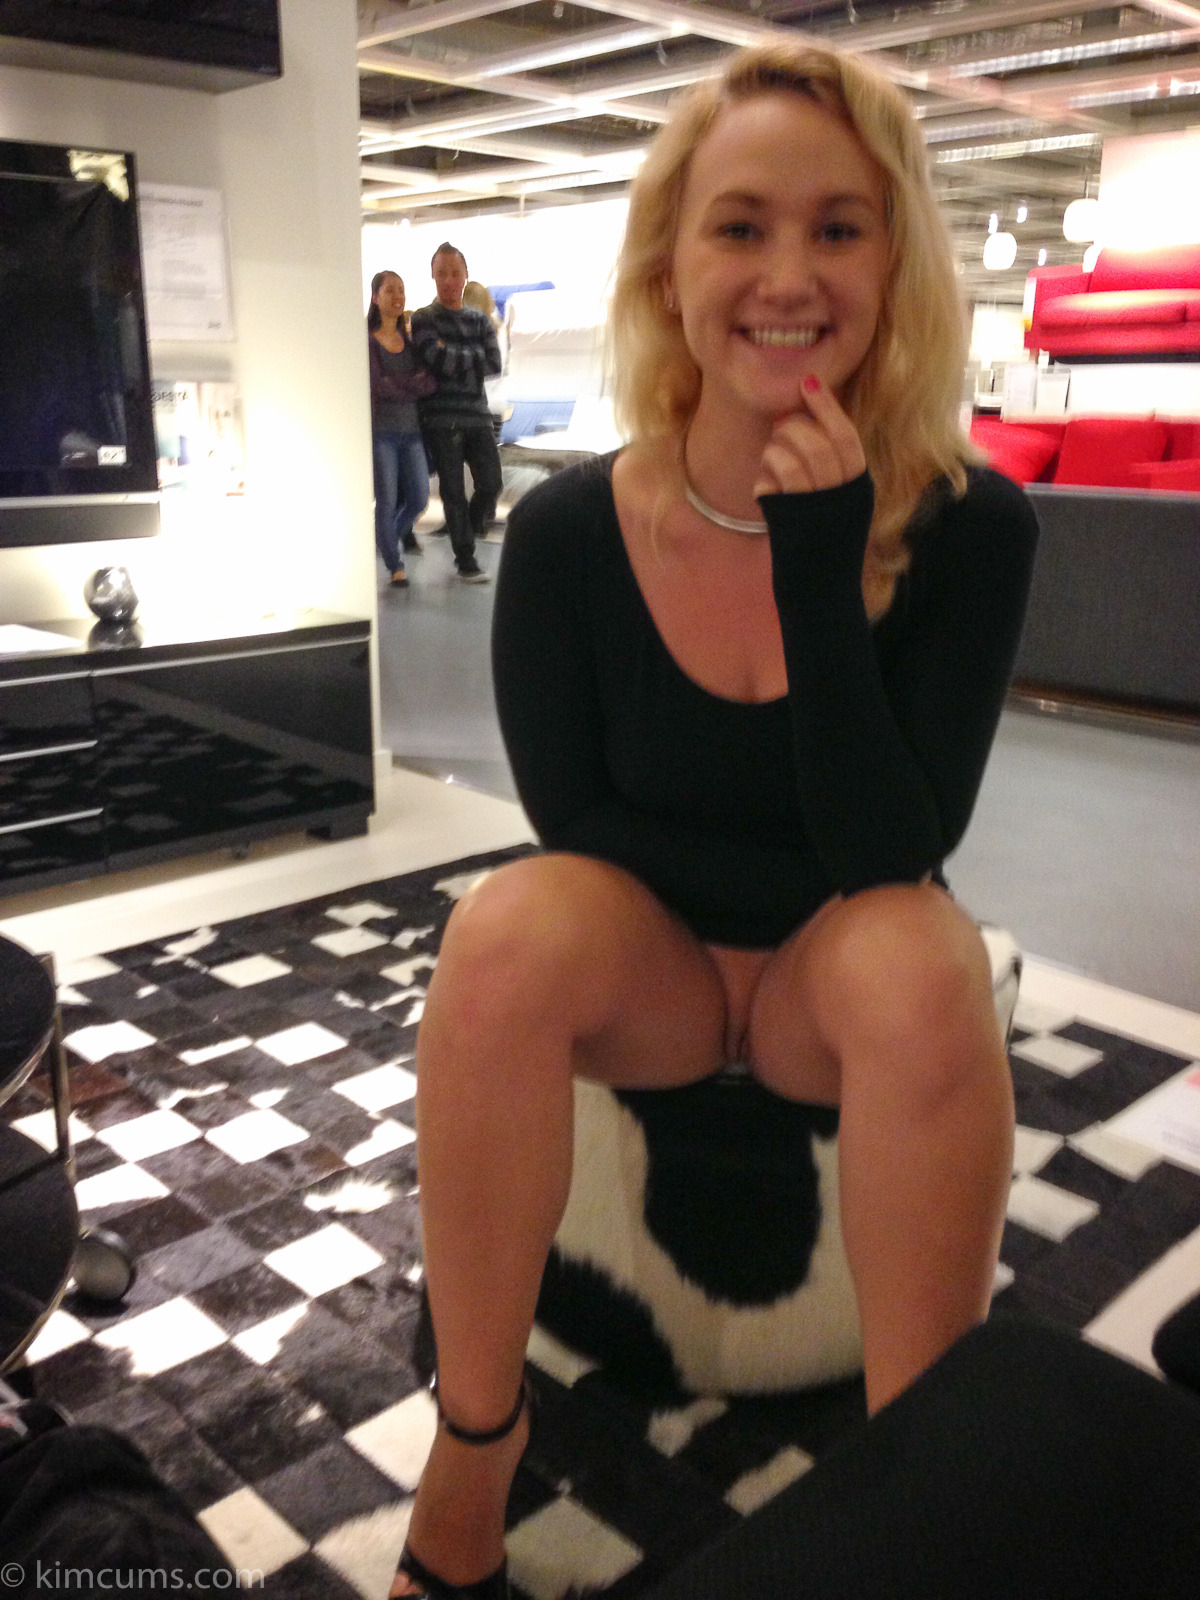 Sometimes I just like to sit around on odd, cow-patterned furniture because&hellip;